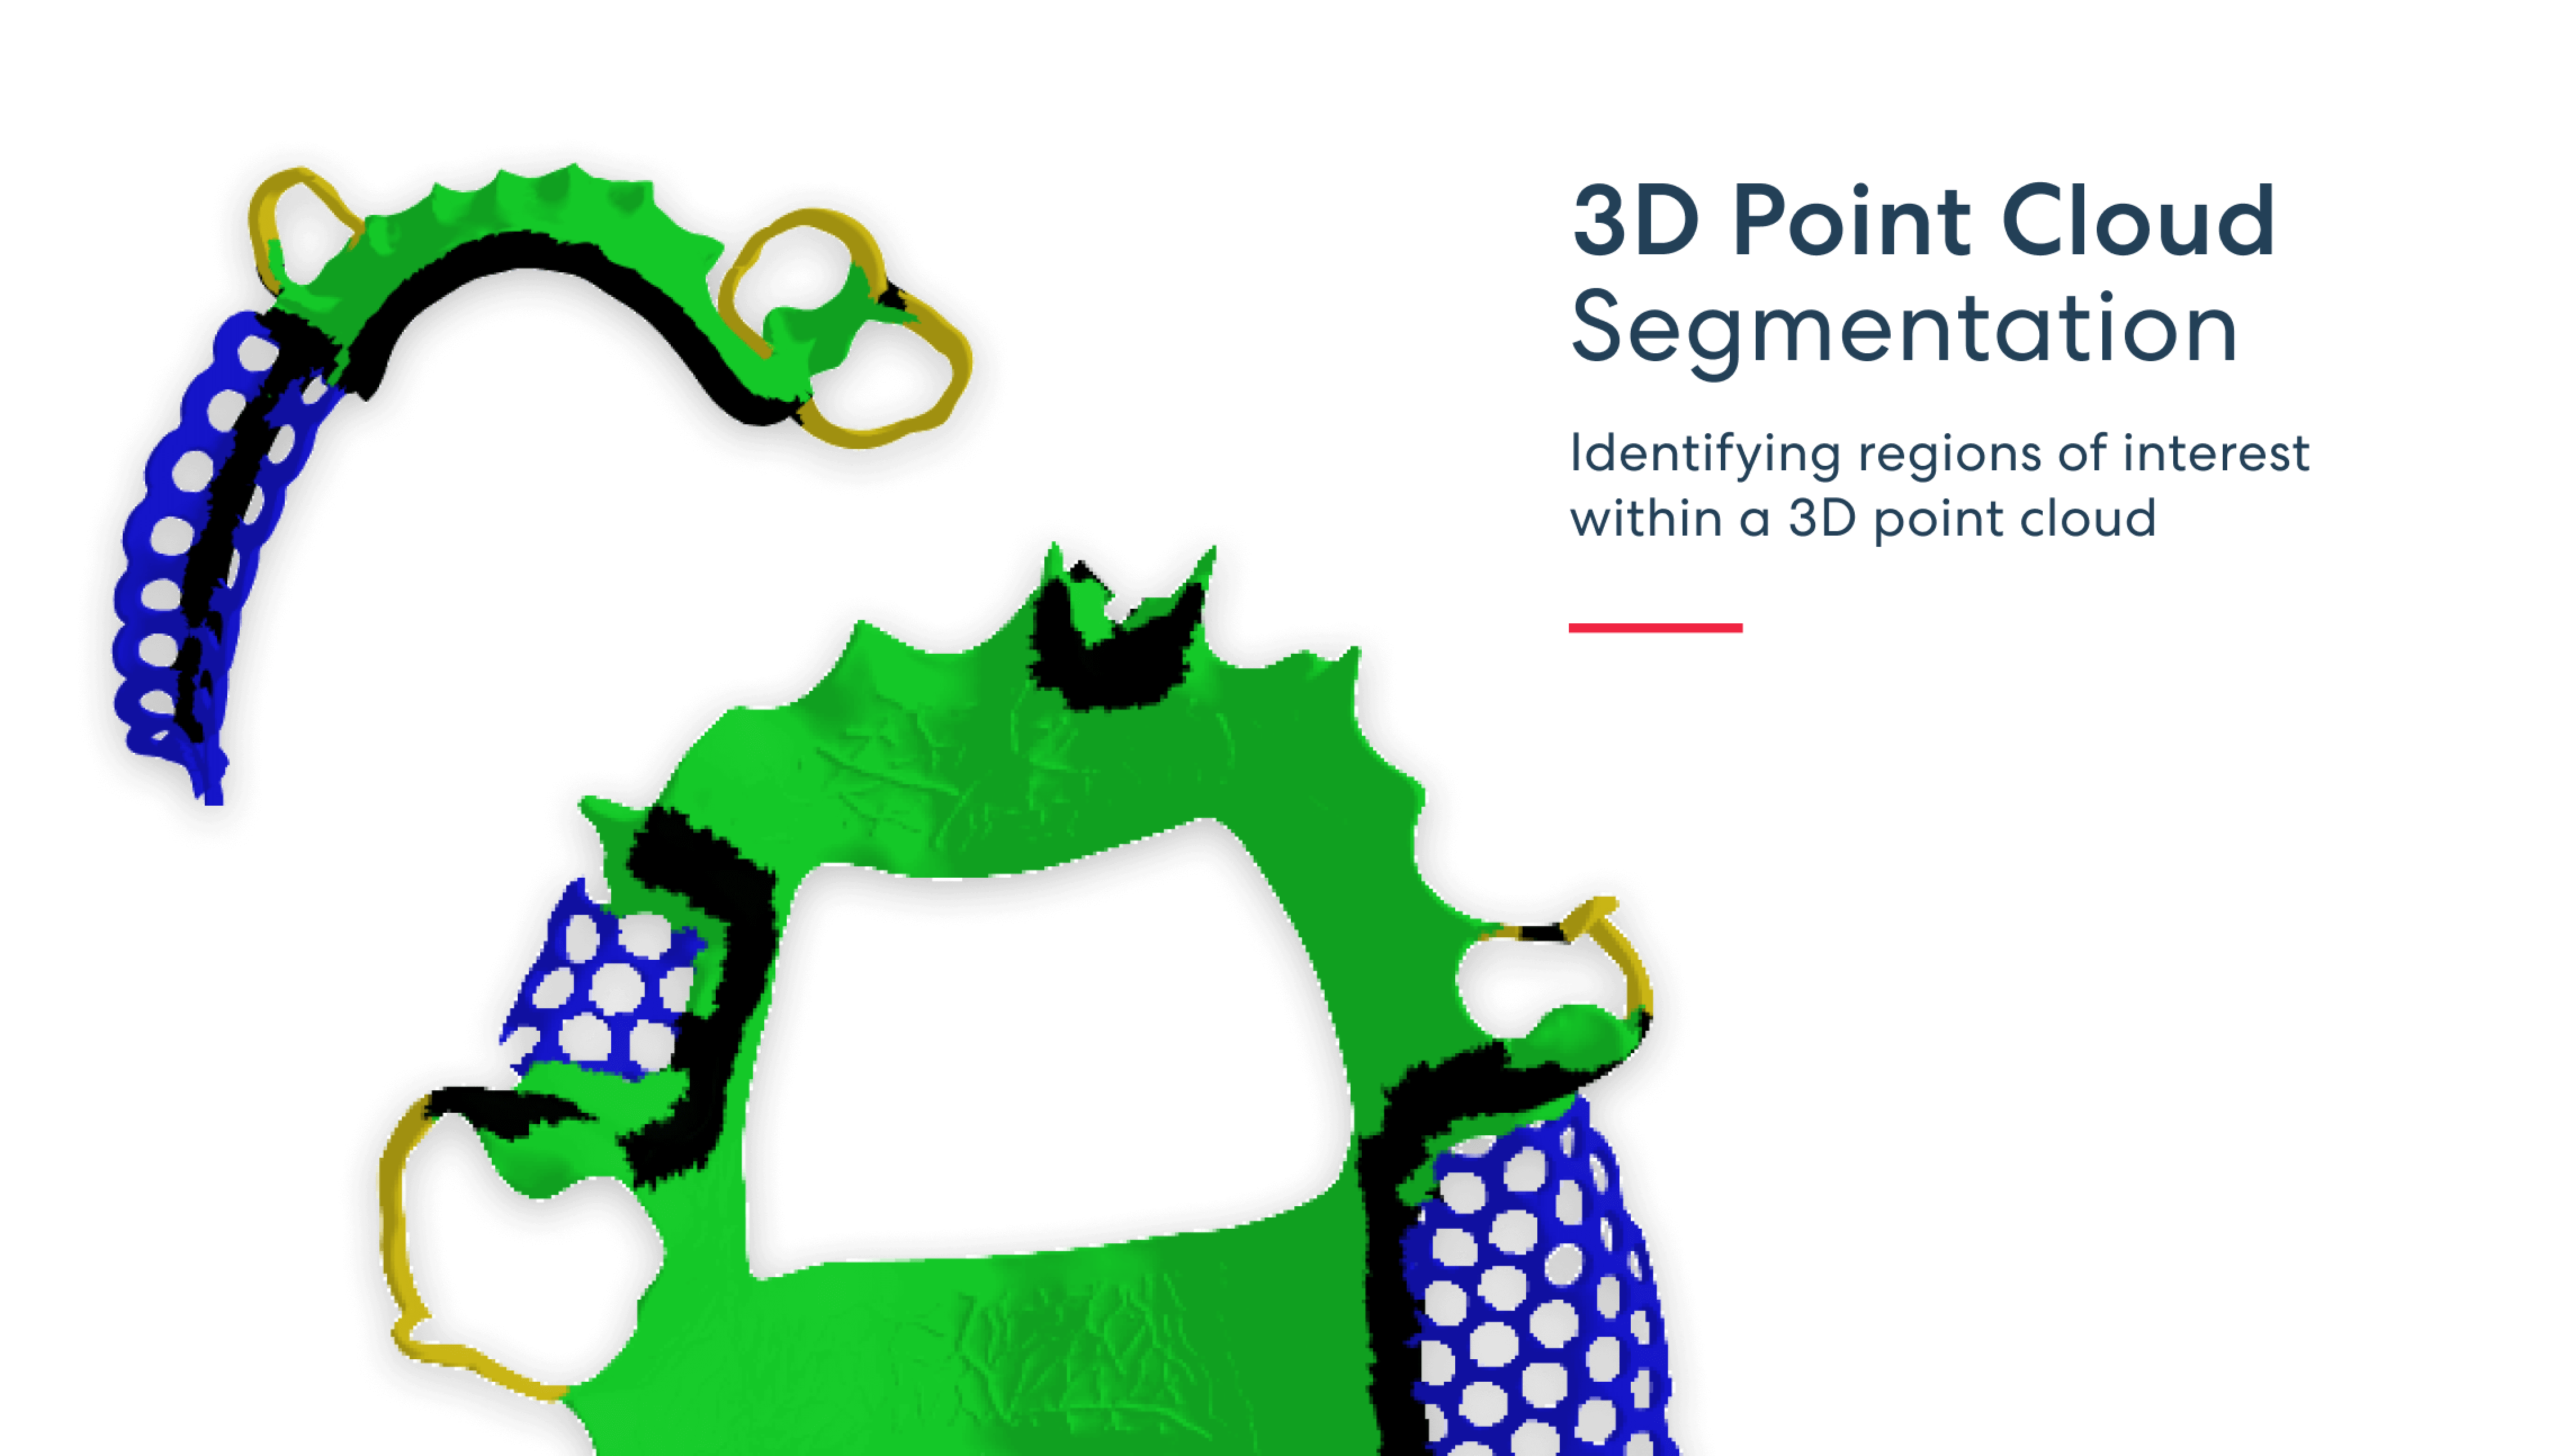 3D Point Cloud Segmentation - Identifying regions of interest within a 3D point cloud